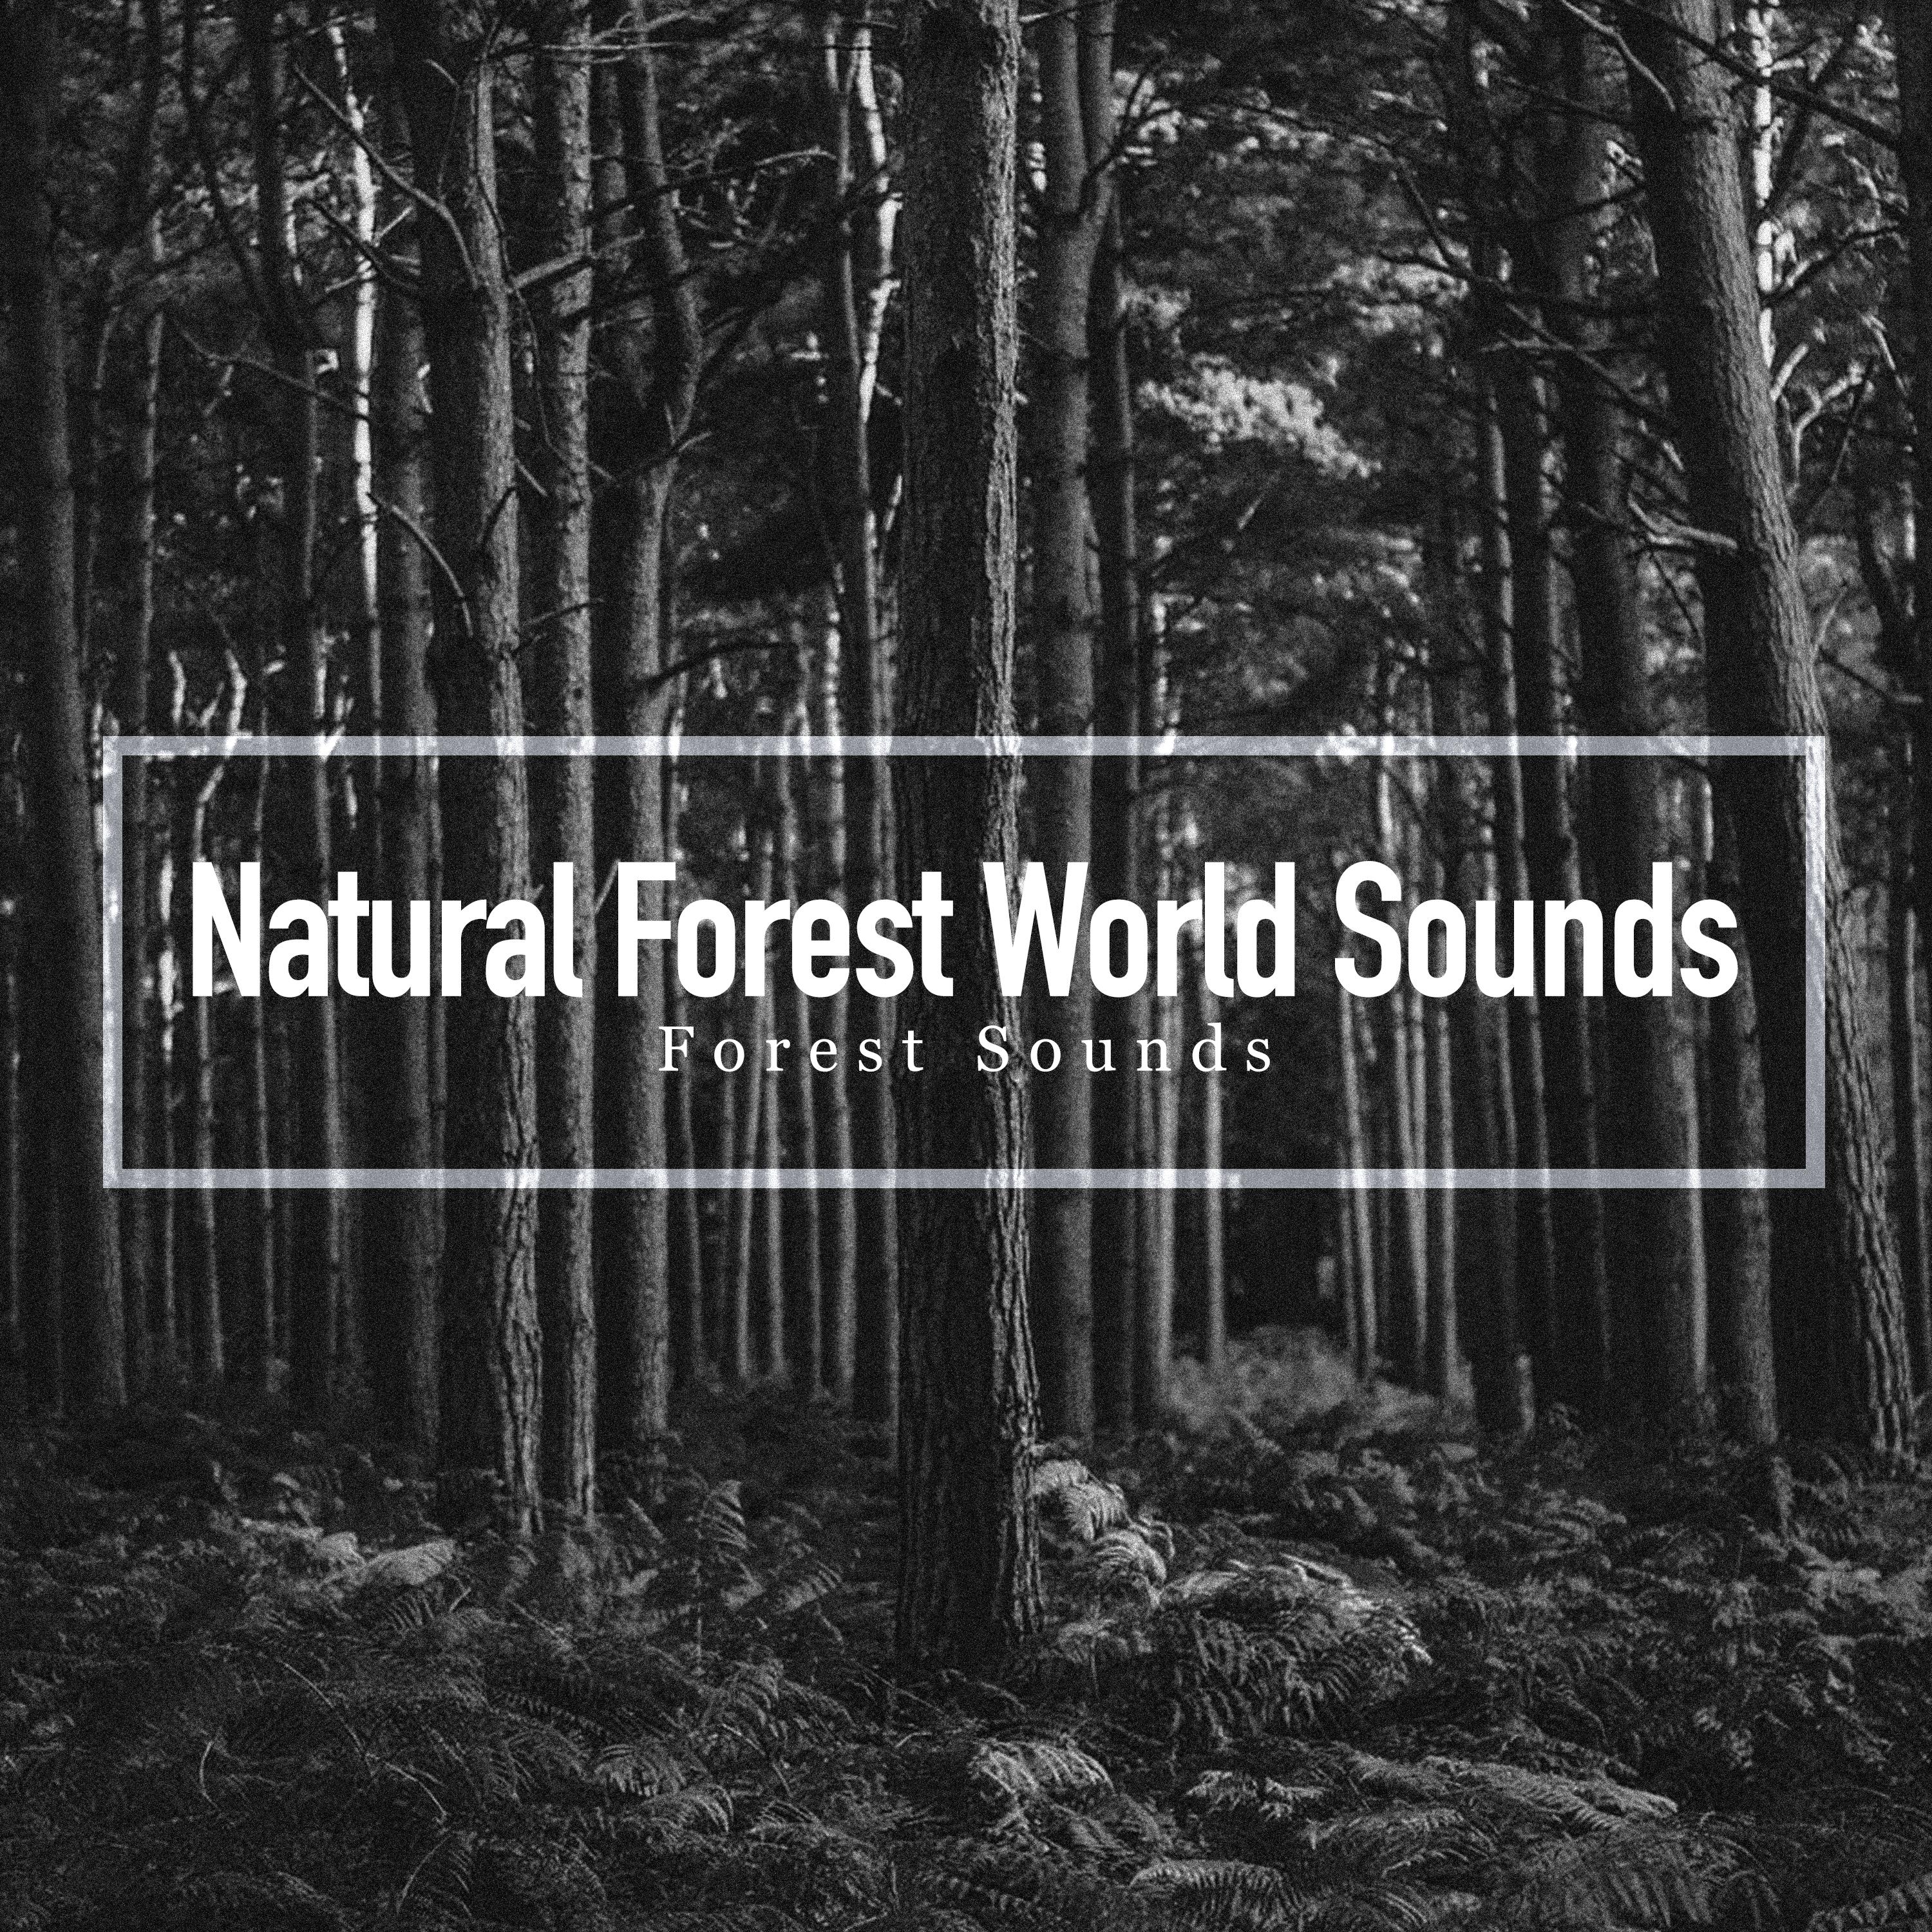 Natural Forest World Sounds